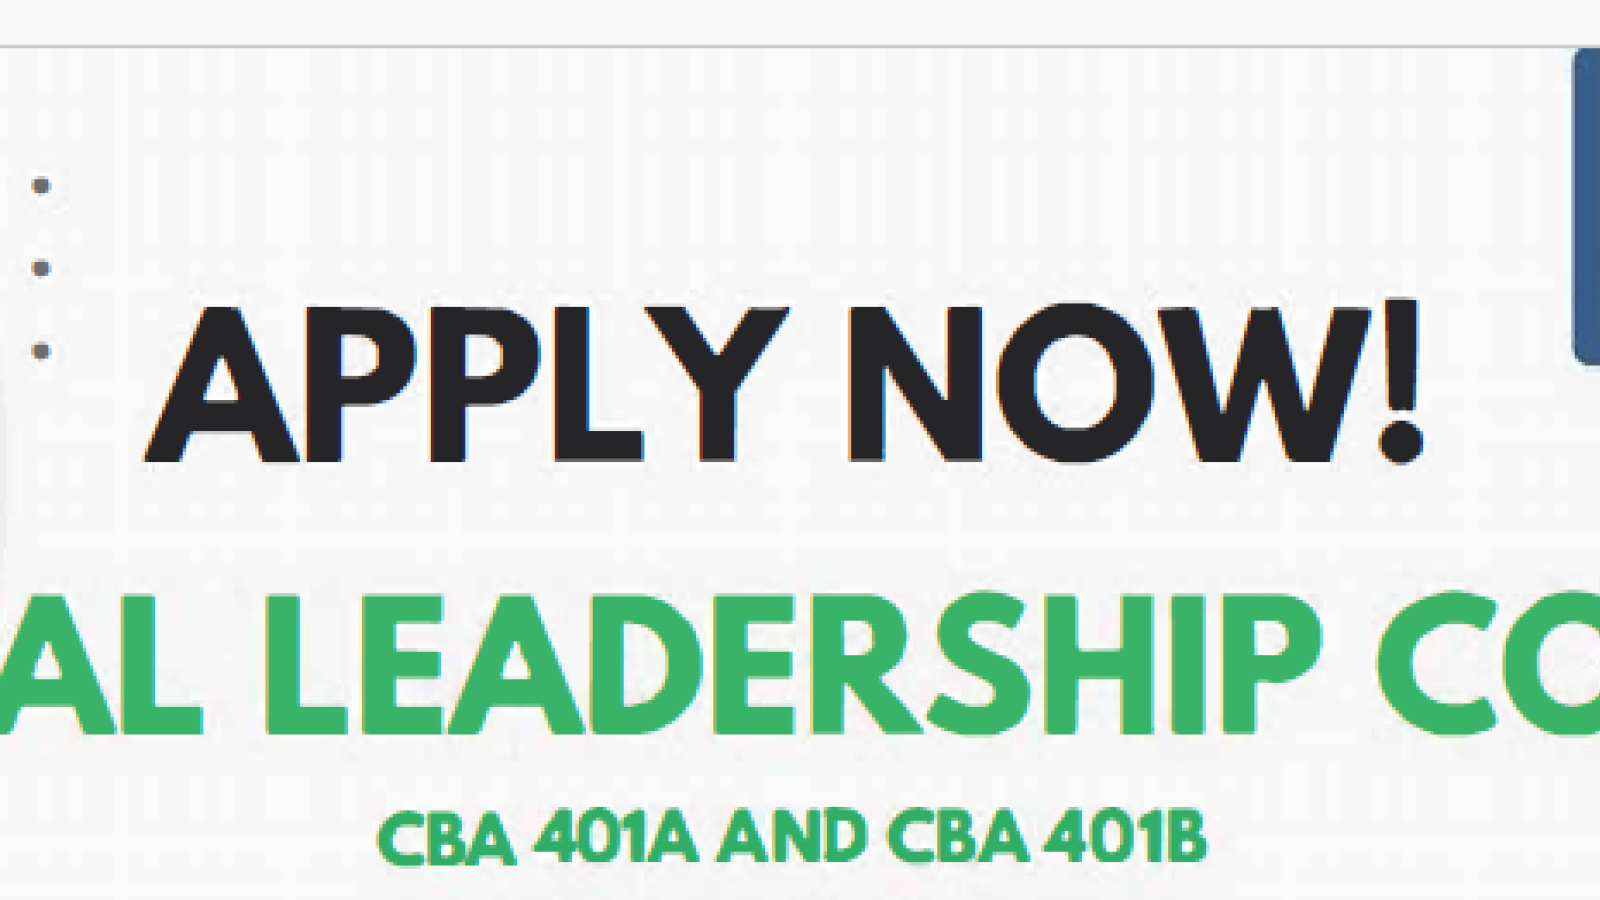 APPLY NOW ETHICAL LEADERSHIP COURSE CBA 401A AND CBA 401B